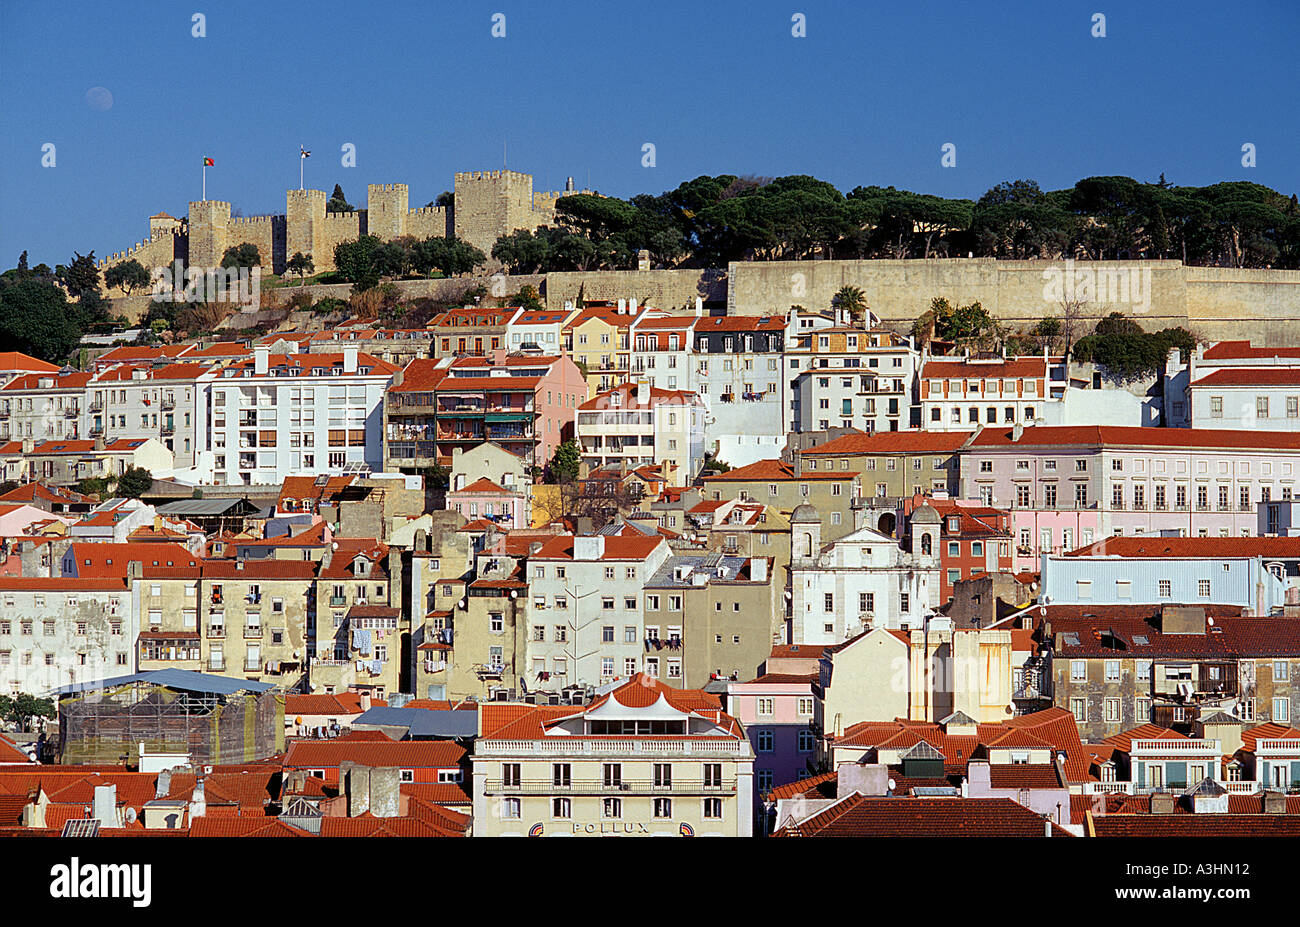 Castle and town view Lisbon Portugal Europe Stock Photo